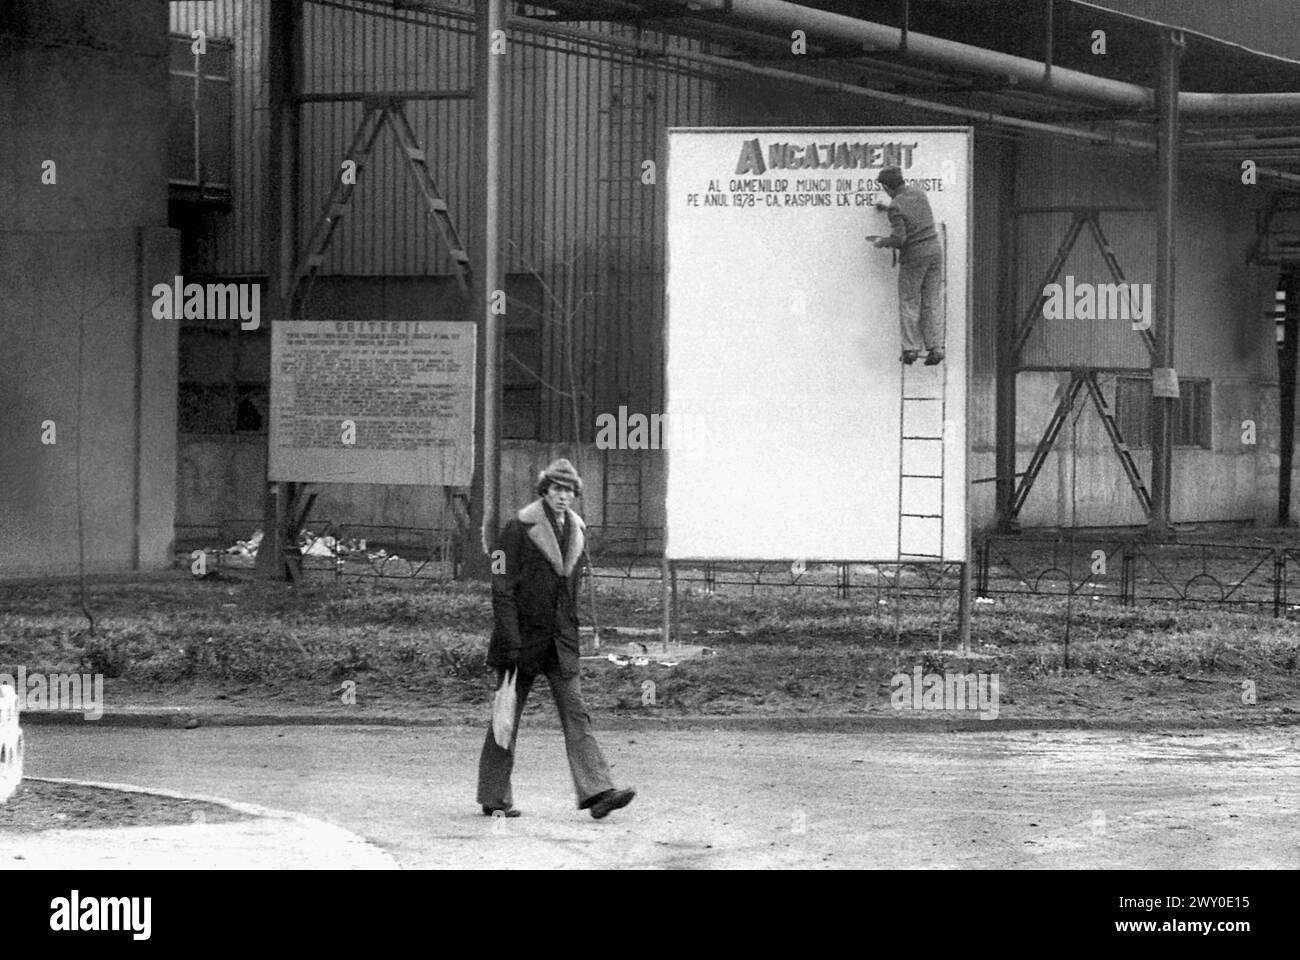 Socialist Republic of Romania in the 1970s. A worker is walking on the grounds of a state-owned factory, while behind him another worker is handwriting on a large board a communist propagandistic message that starts with the words 'Commitment of the working people...'. Stock Photo